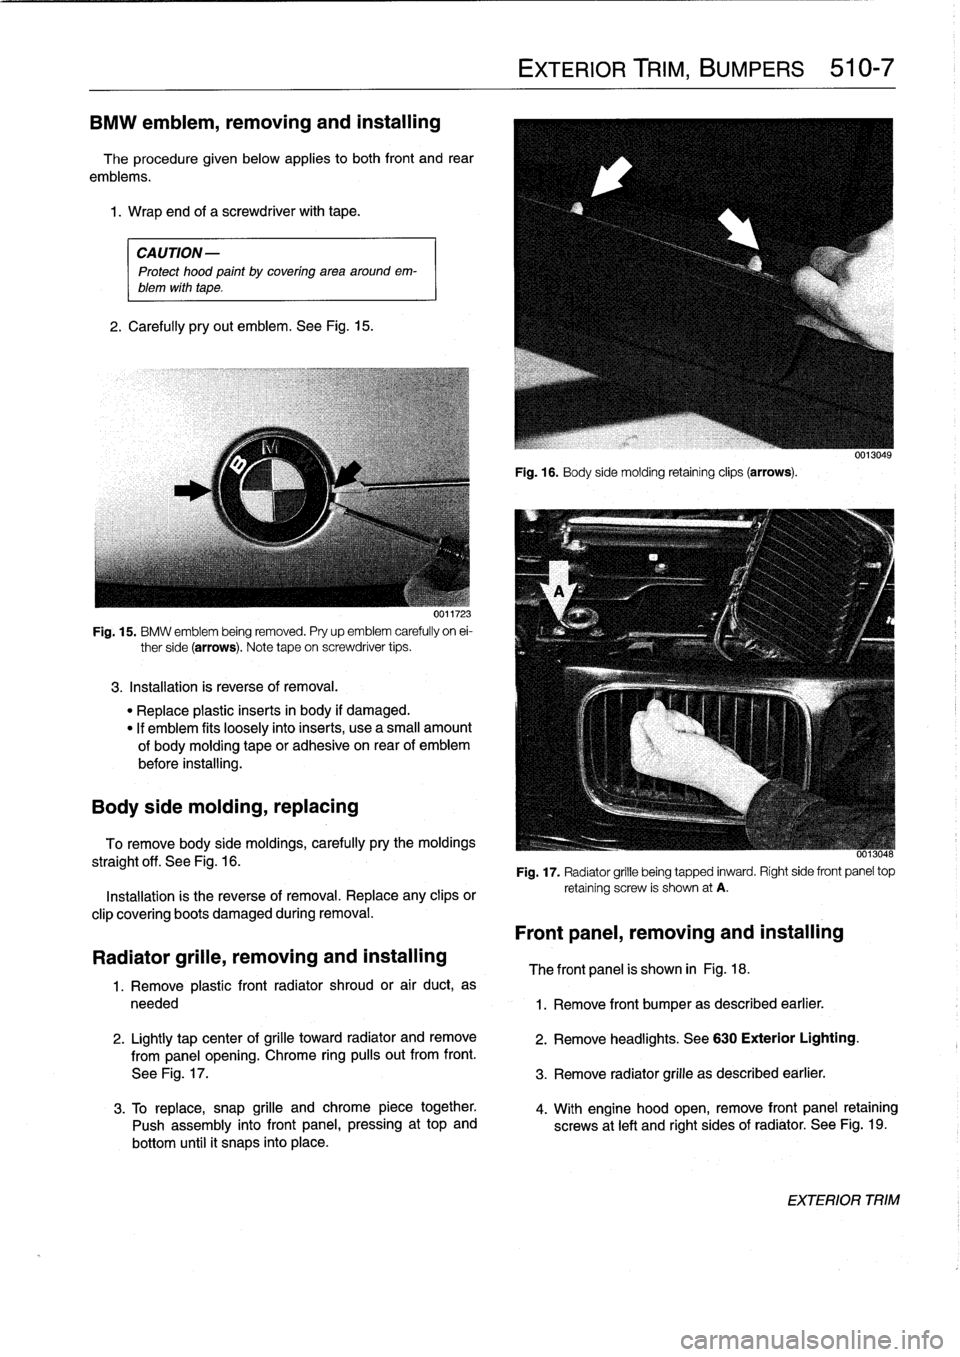 BMW 328i 1994 E36 Workshop Manual 
BMW
emblem,
removing
and
installing

The
procedure
given
below
applies
to
both
front
and
rear

emblems
.

1
.
Wrap
and
of
a
screwdriver
with
tape
.

CAUTION-

Protect
hood
paint
by
coveringarea
aroun